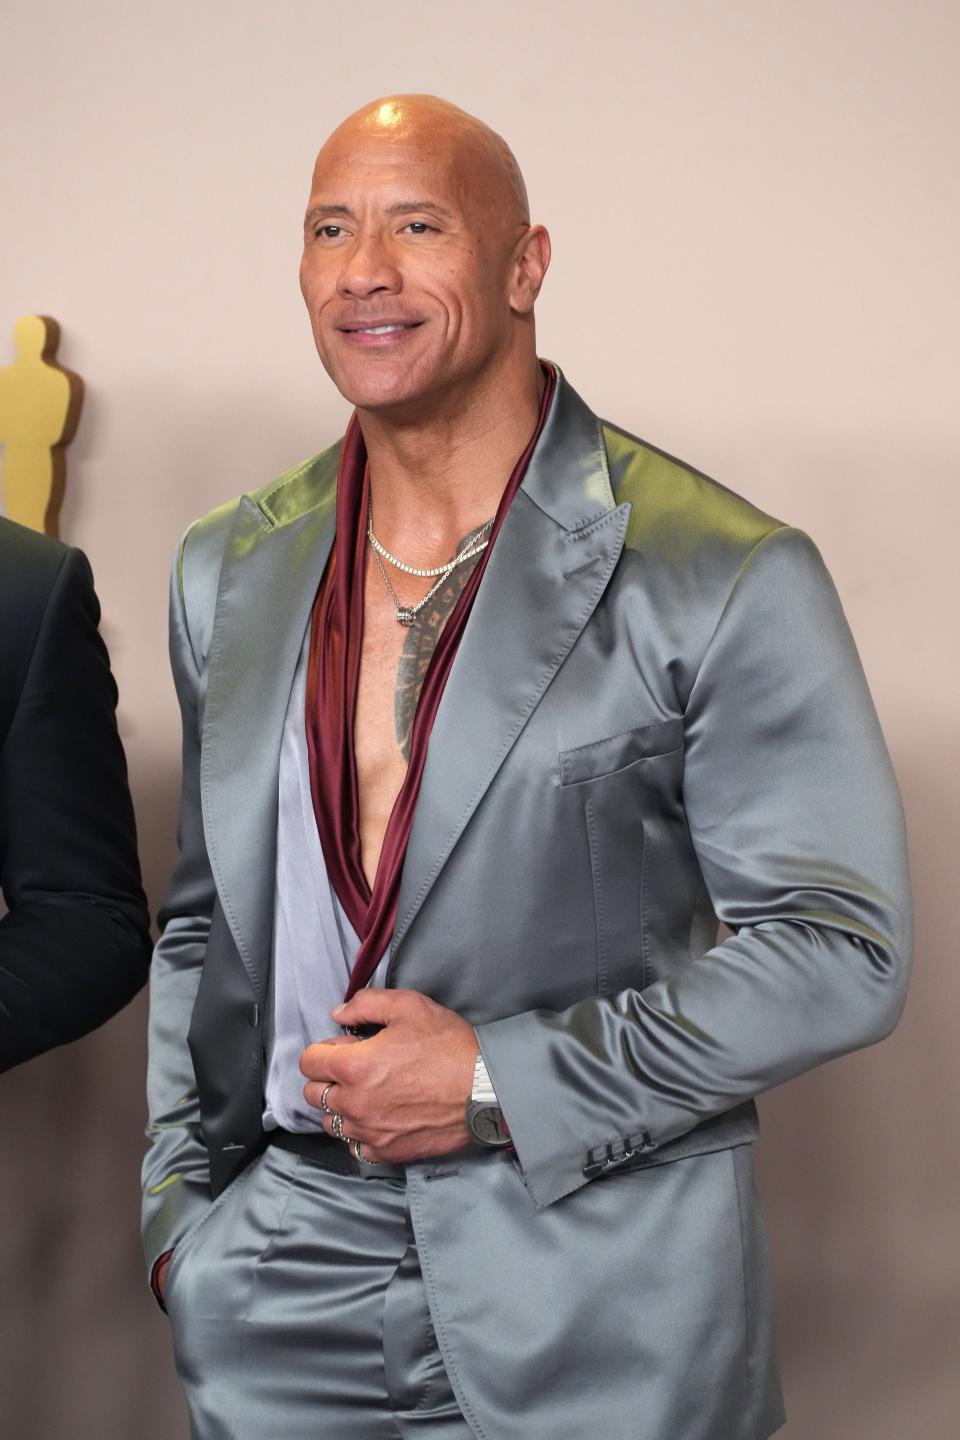 HOLLYWOOD, CALIFORNIA - MARCH 10: Dwayne Johnson onstage in the press room at the 96th Annual Academy Awards at Ovation Hollywood on March 10, 2024 in Hollywood, California. (Photo by Jeff Kravitz/FilmMagic)